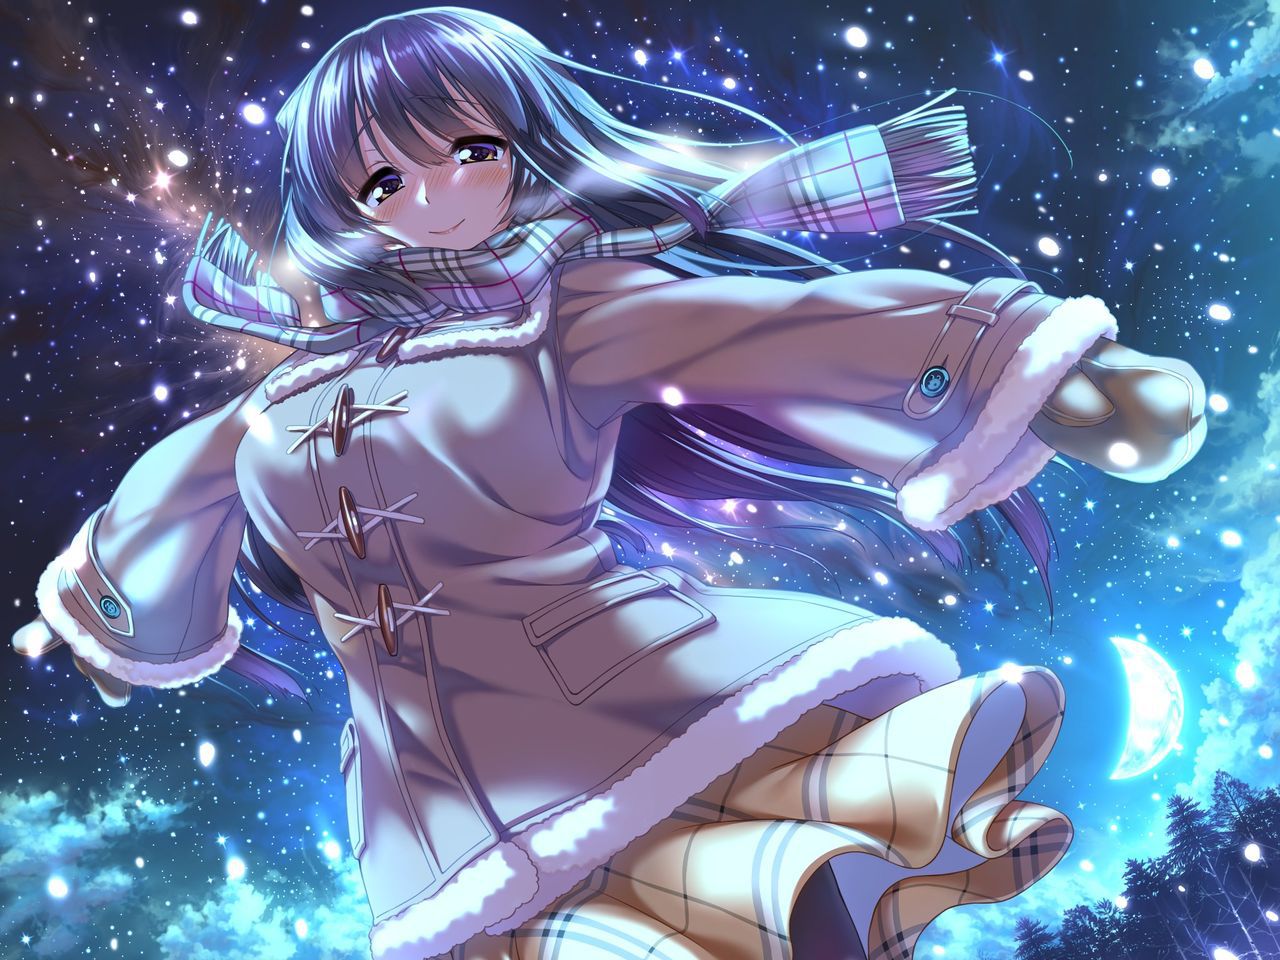 [2nd] Beautiful girl secondary image of Starry Sky 2 [non-erotic] 7